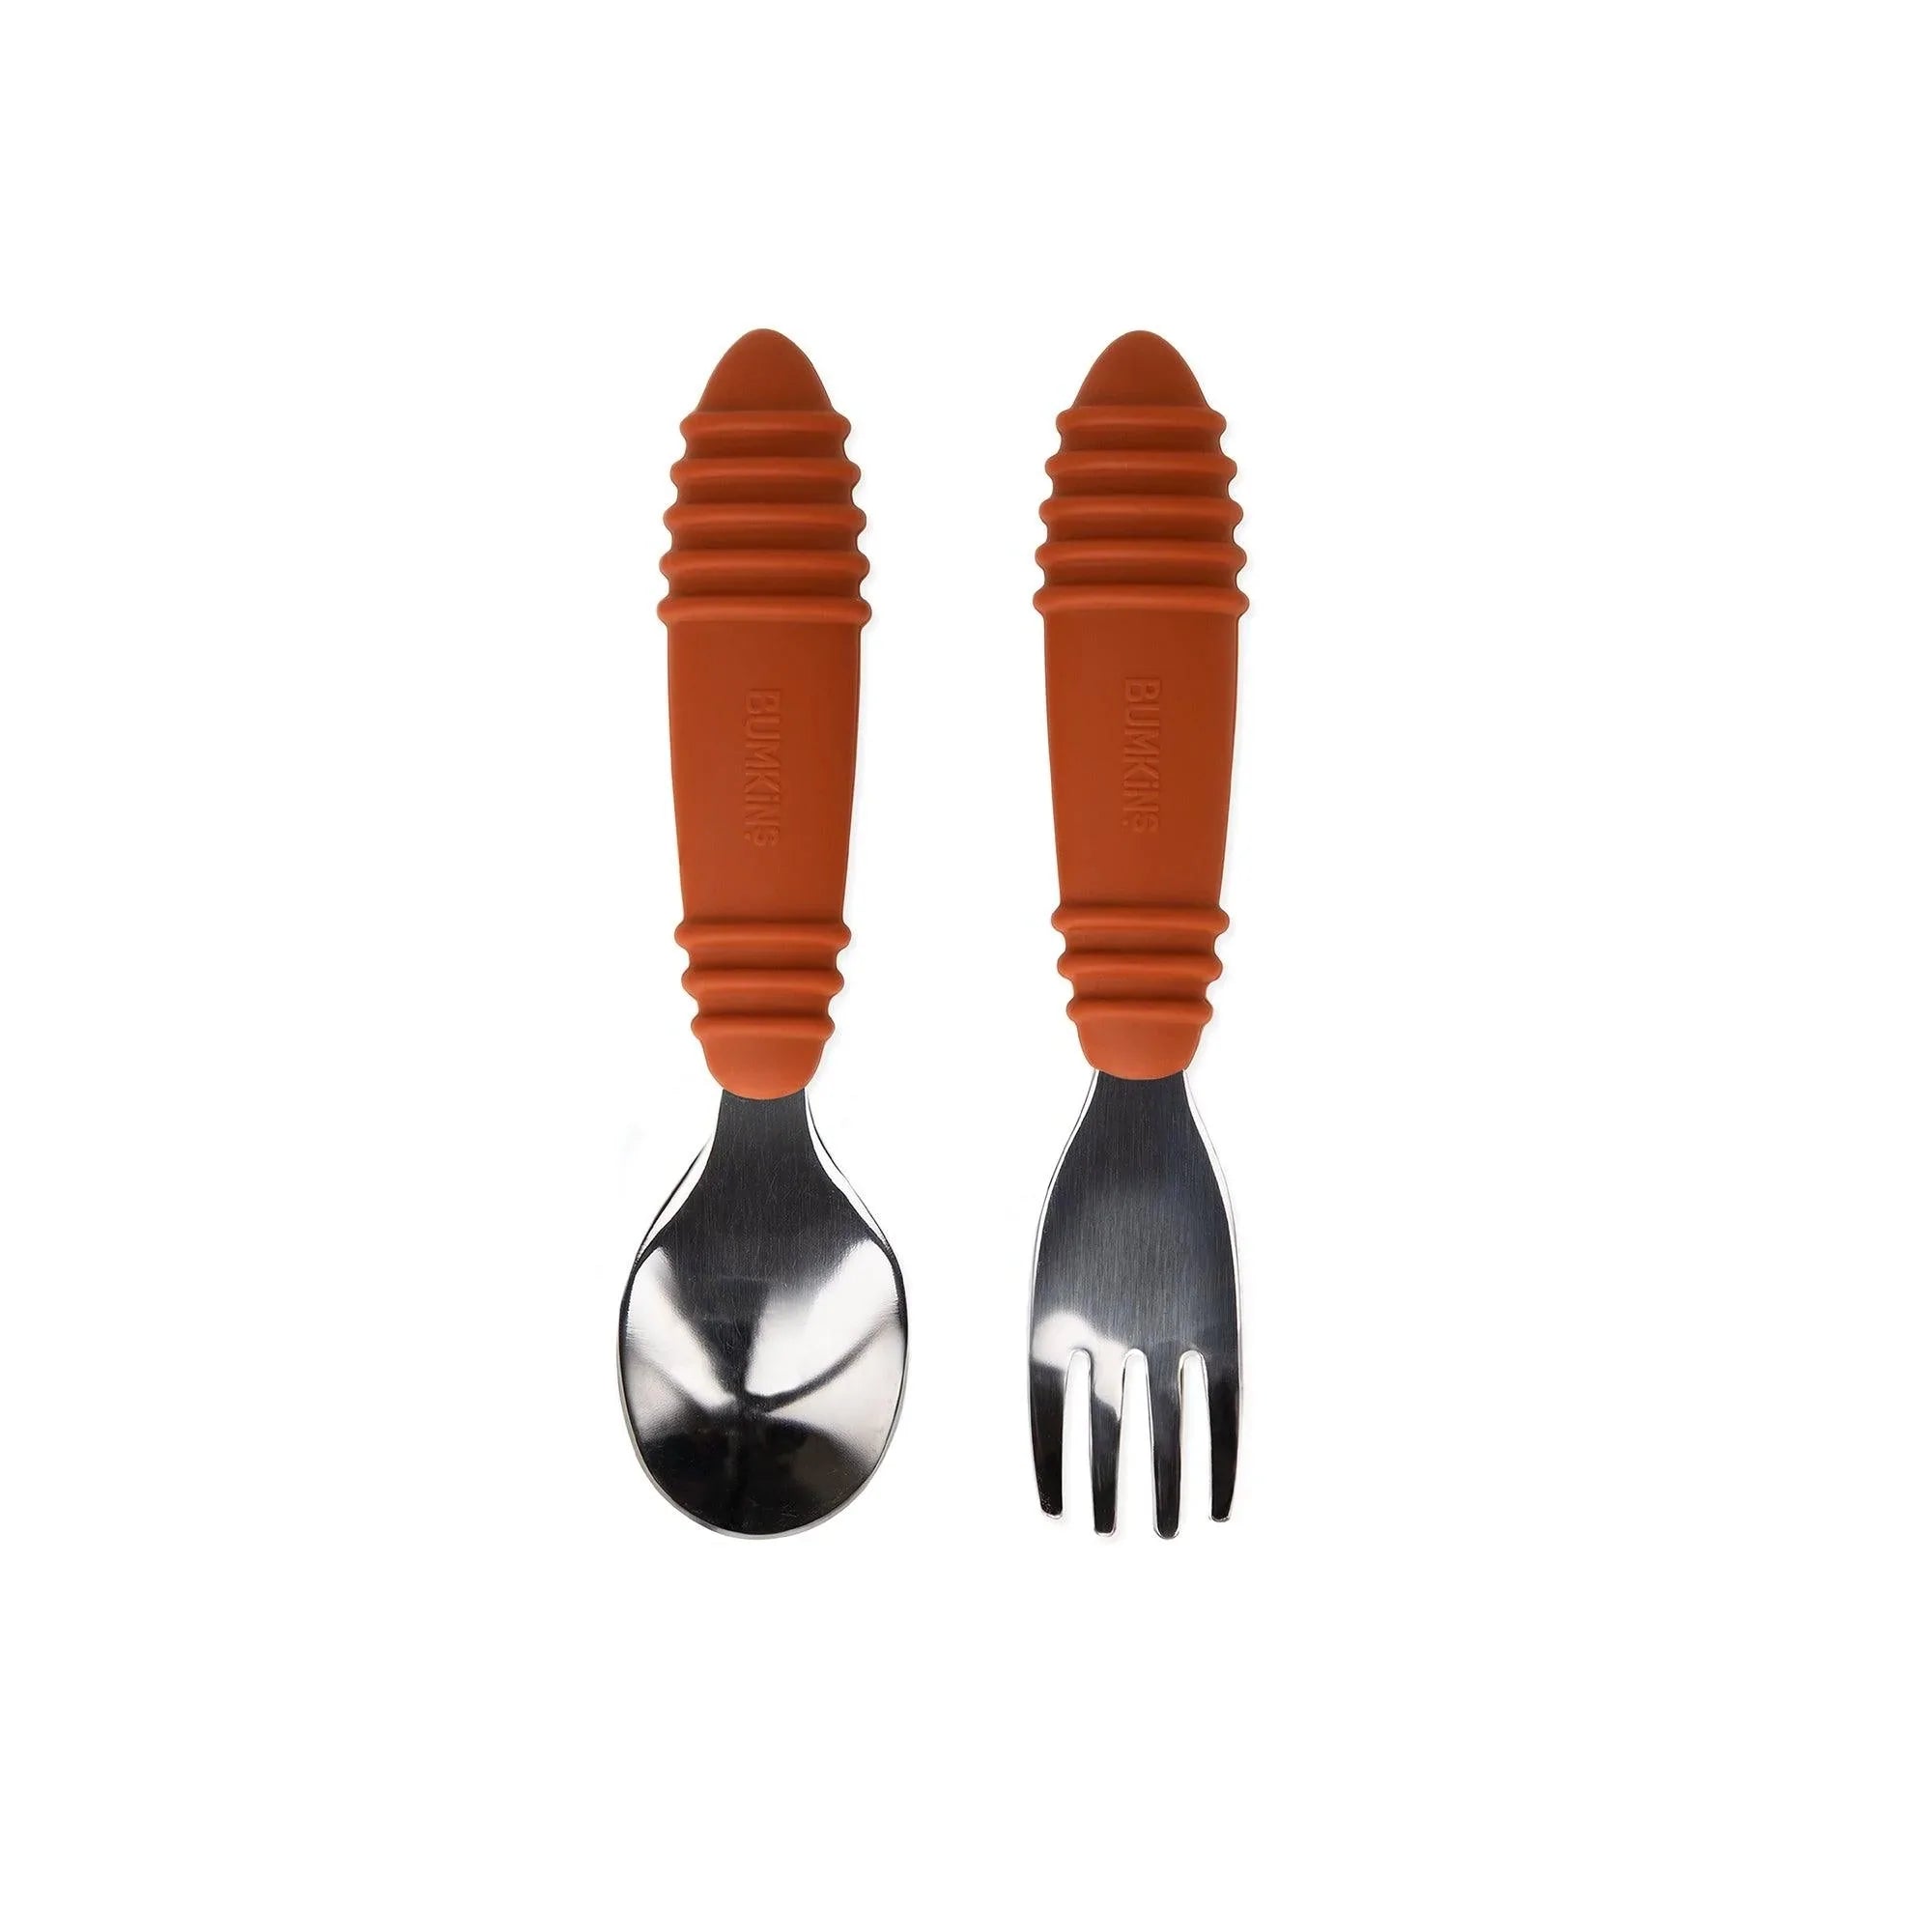 Toddler Spoon and Fork Set in Boho Clay for Self-Feeding | Bumkins